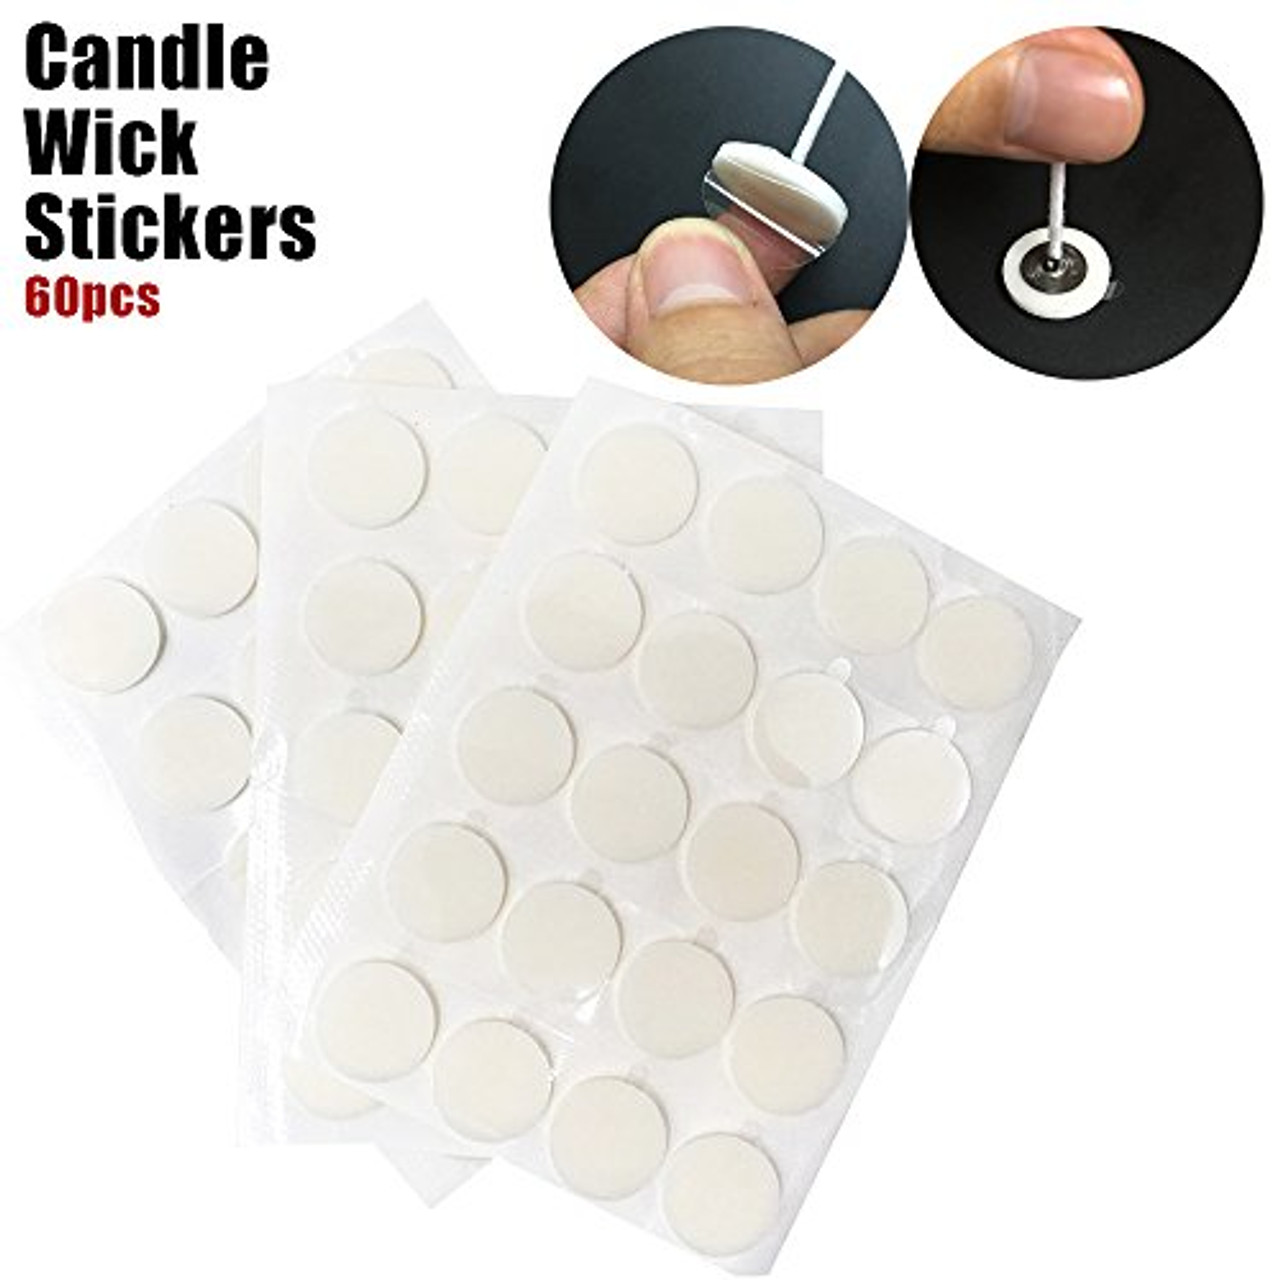 EricX Light 8 inch Candle Wick with Candle Wick Stickers and